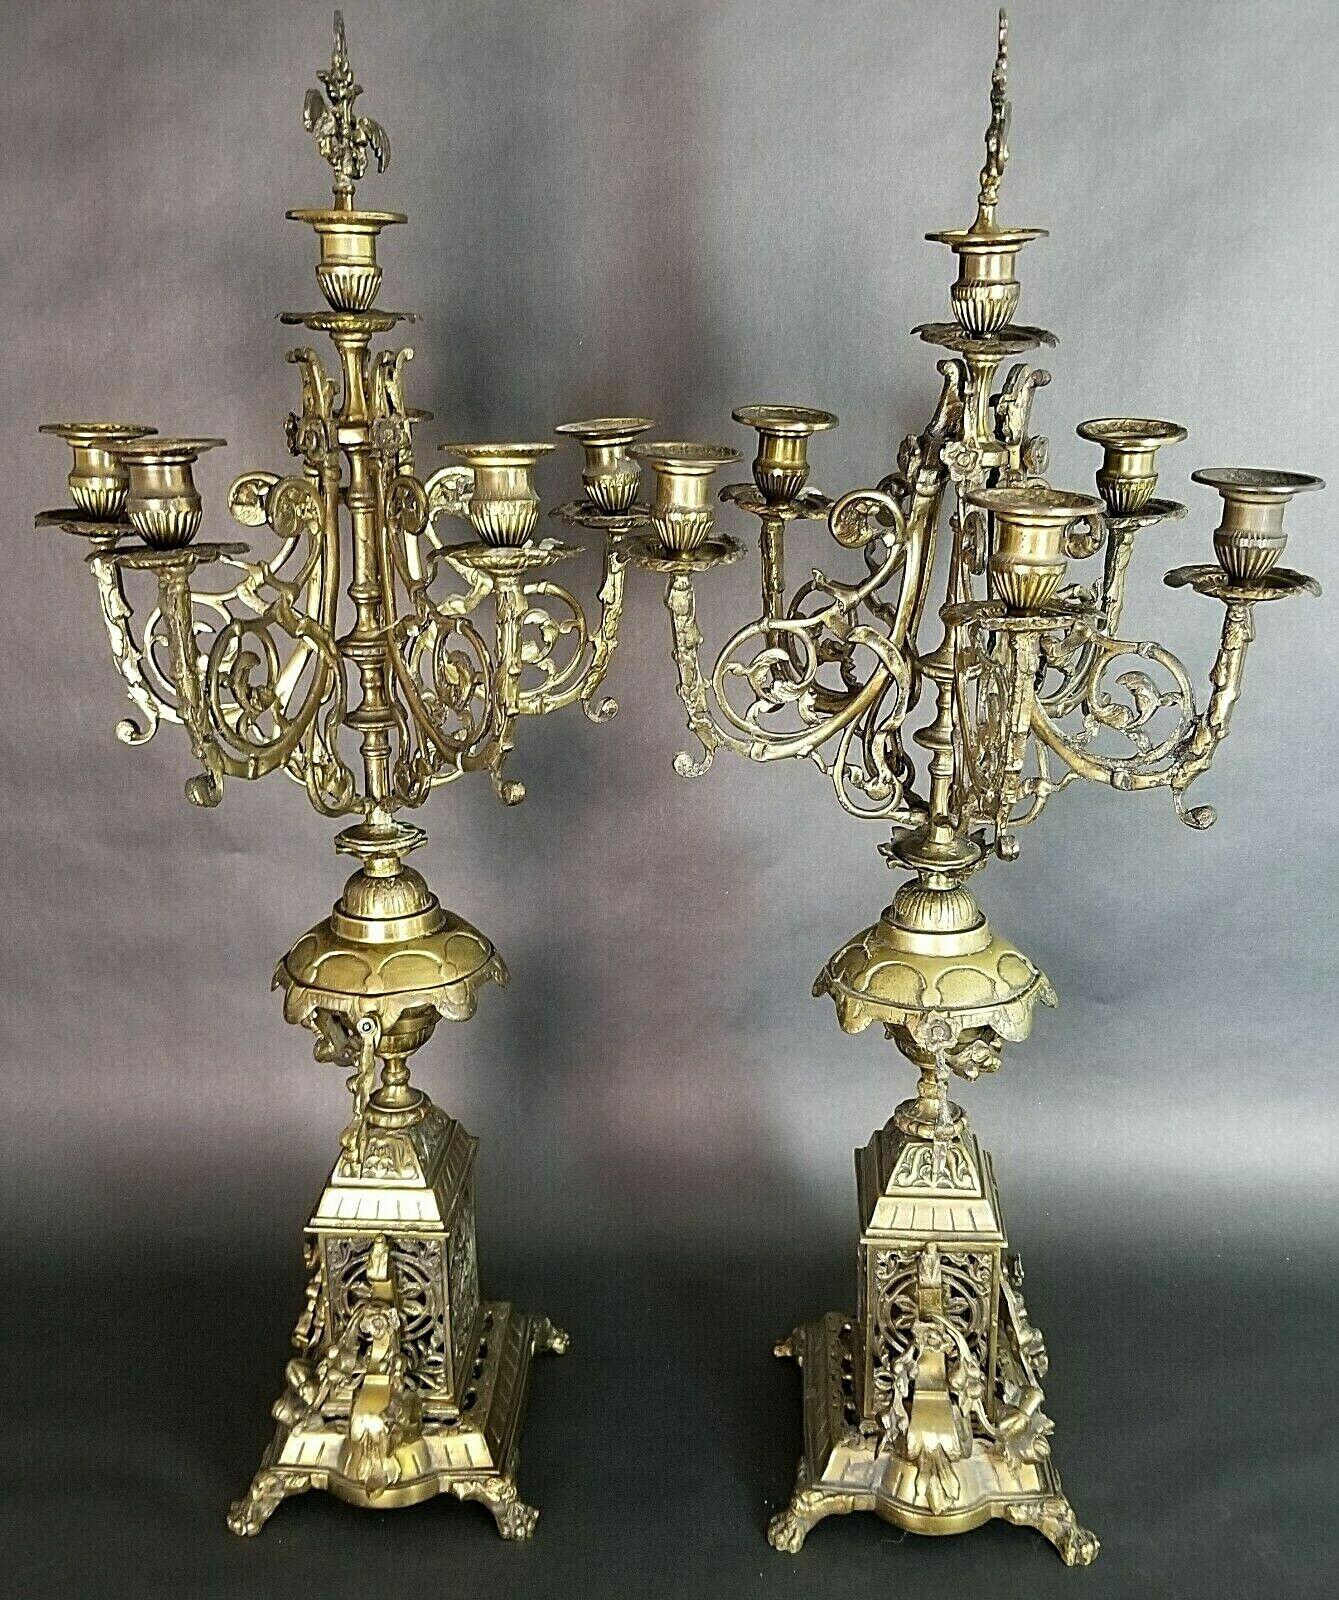 Unknown Antique Italian Ornate Bronze French Louis XV Rococo 6 Point Candelabras For Sale